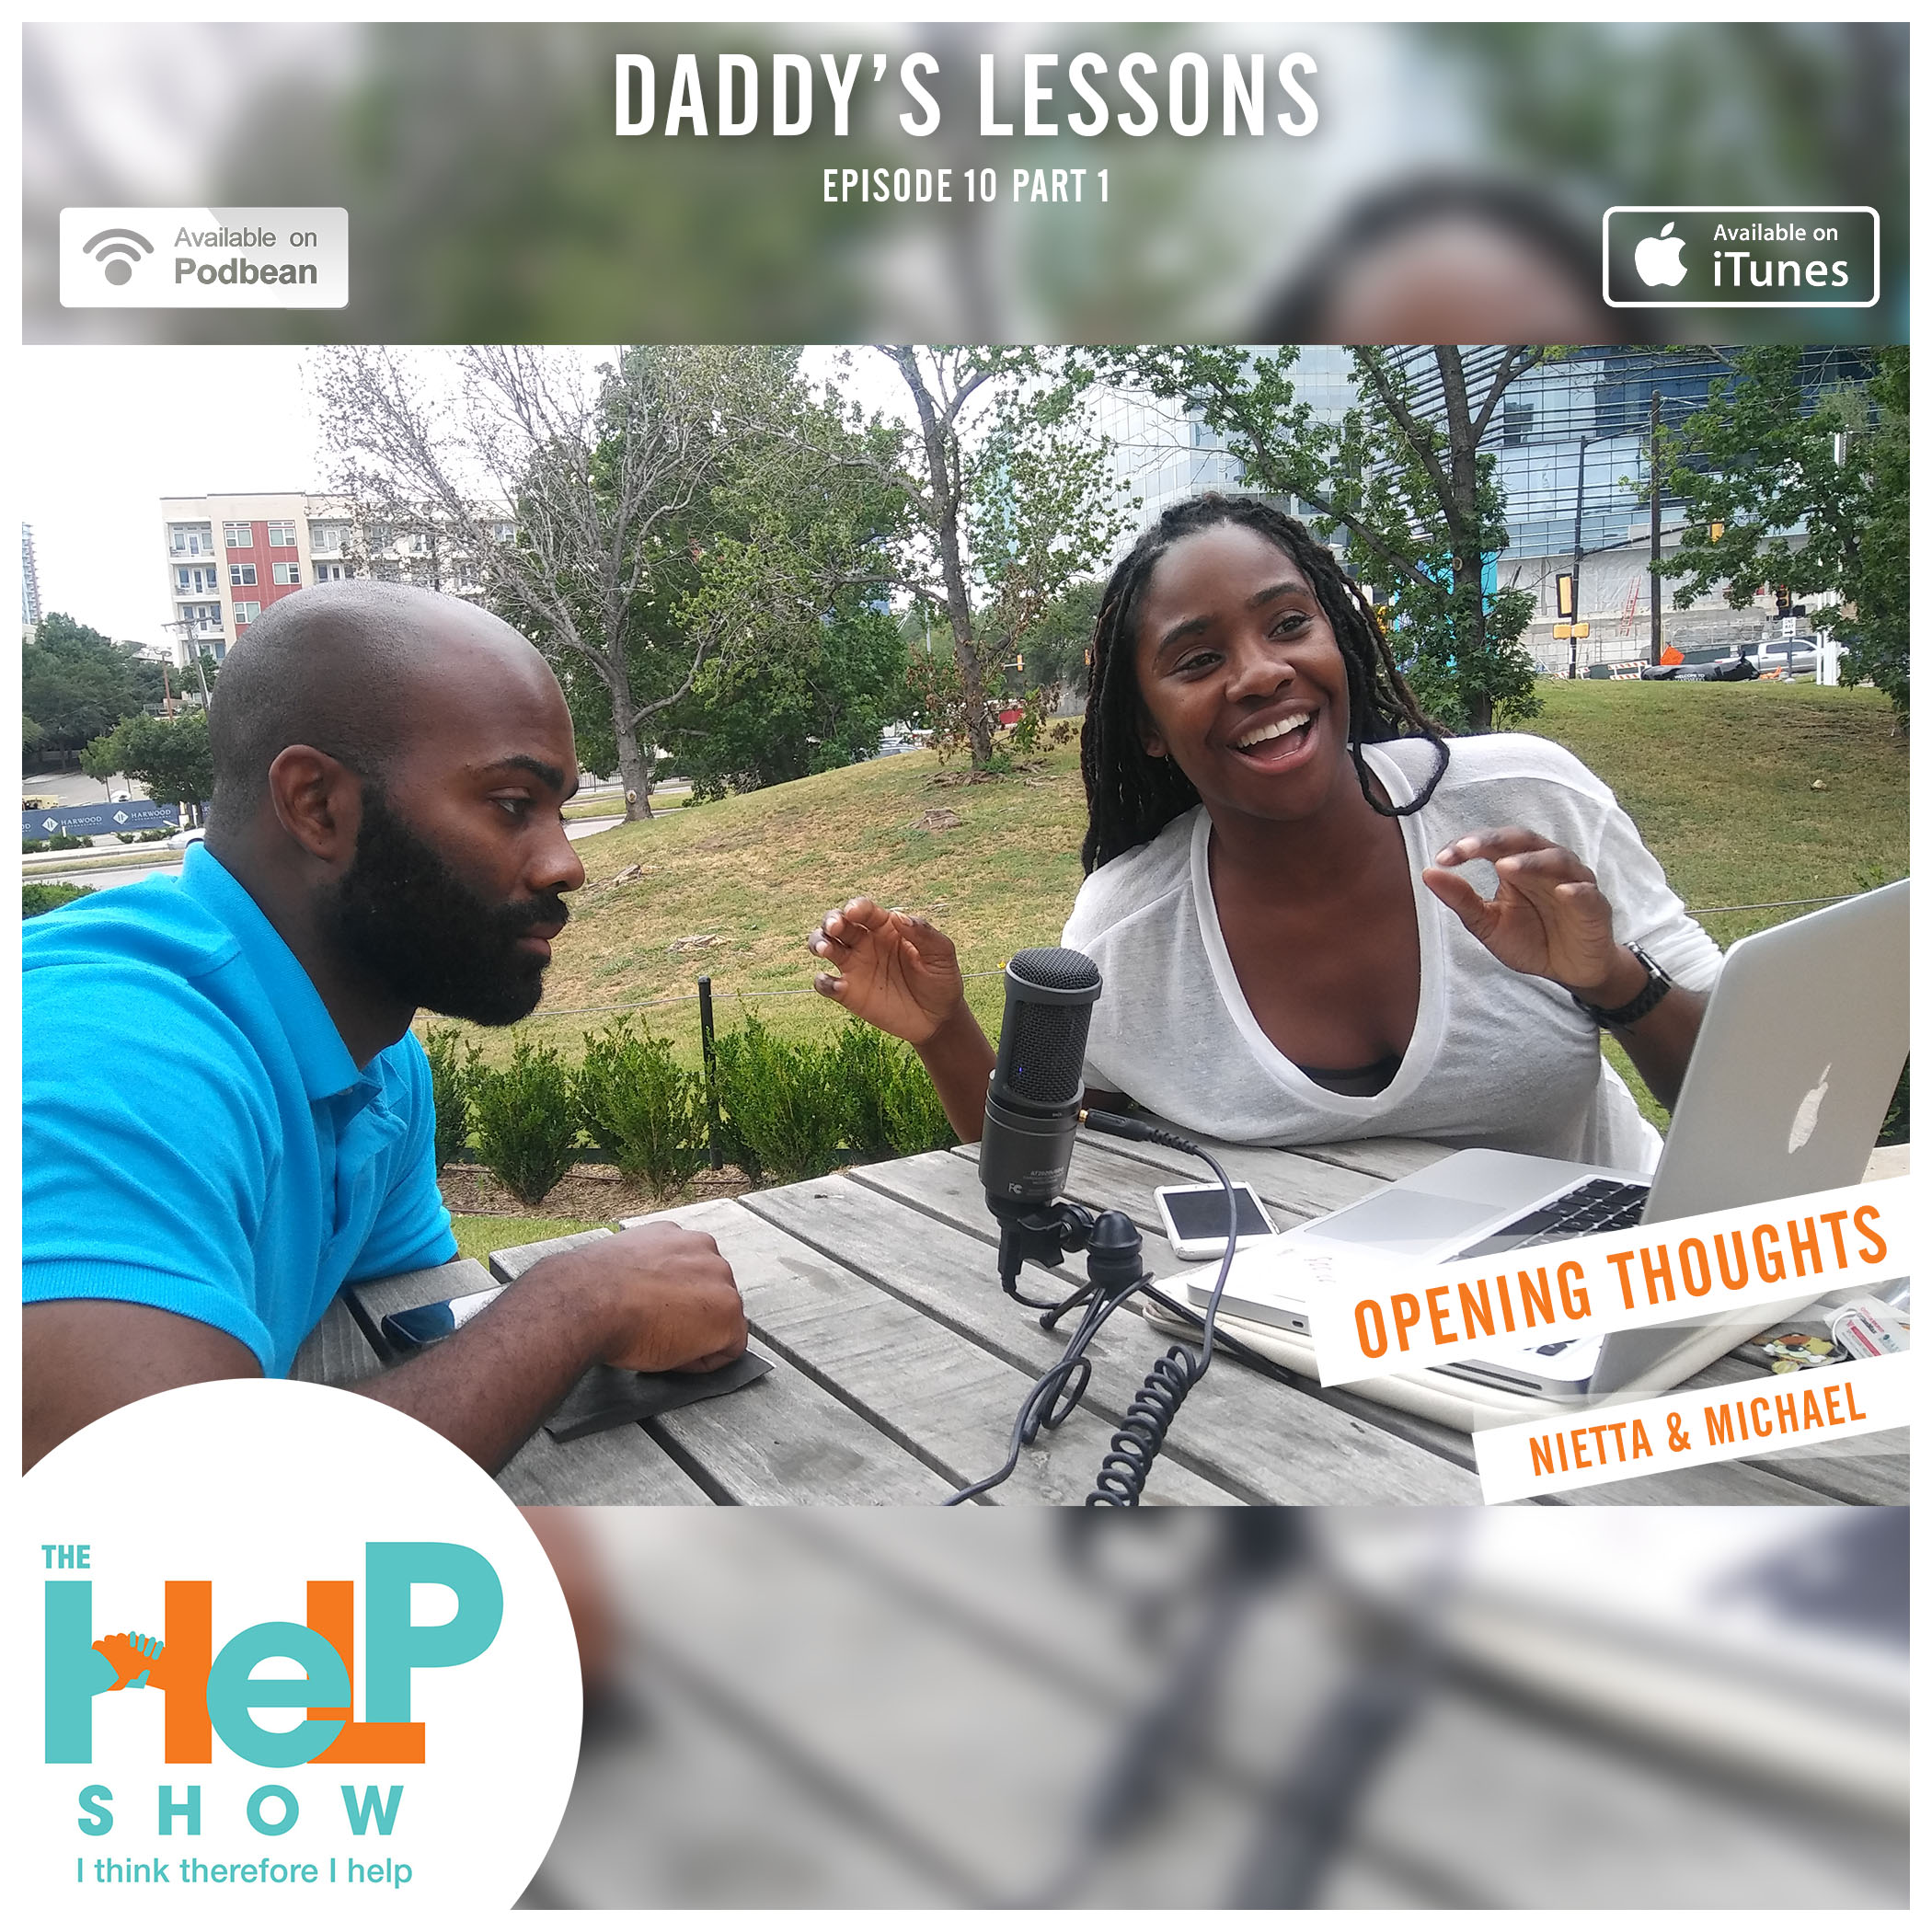 Daddy’s Lessons (Episode 10: Part 1) Opening Thoughts with Nietta & Michael 